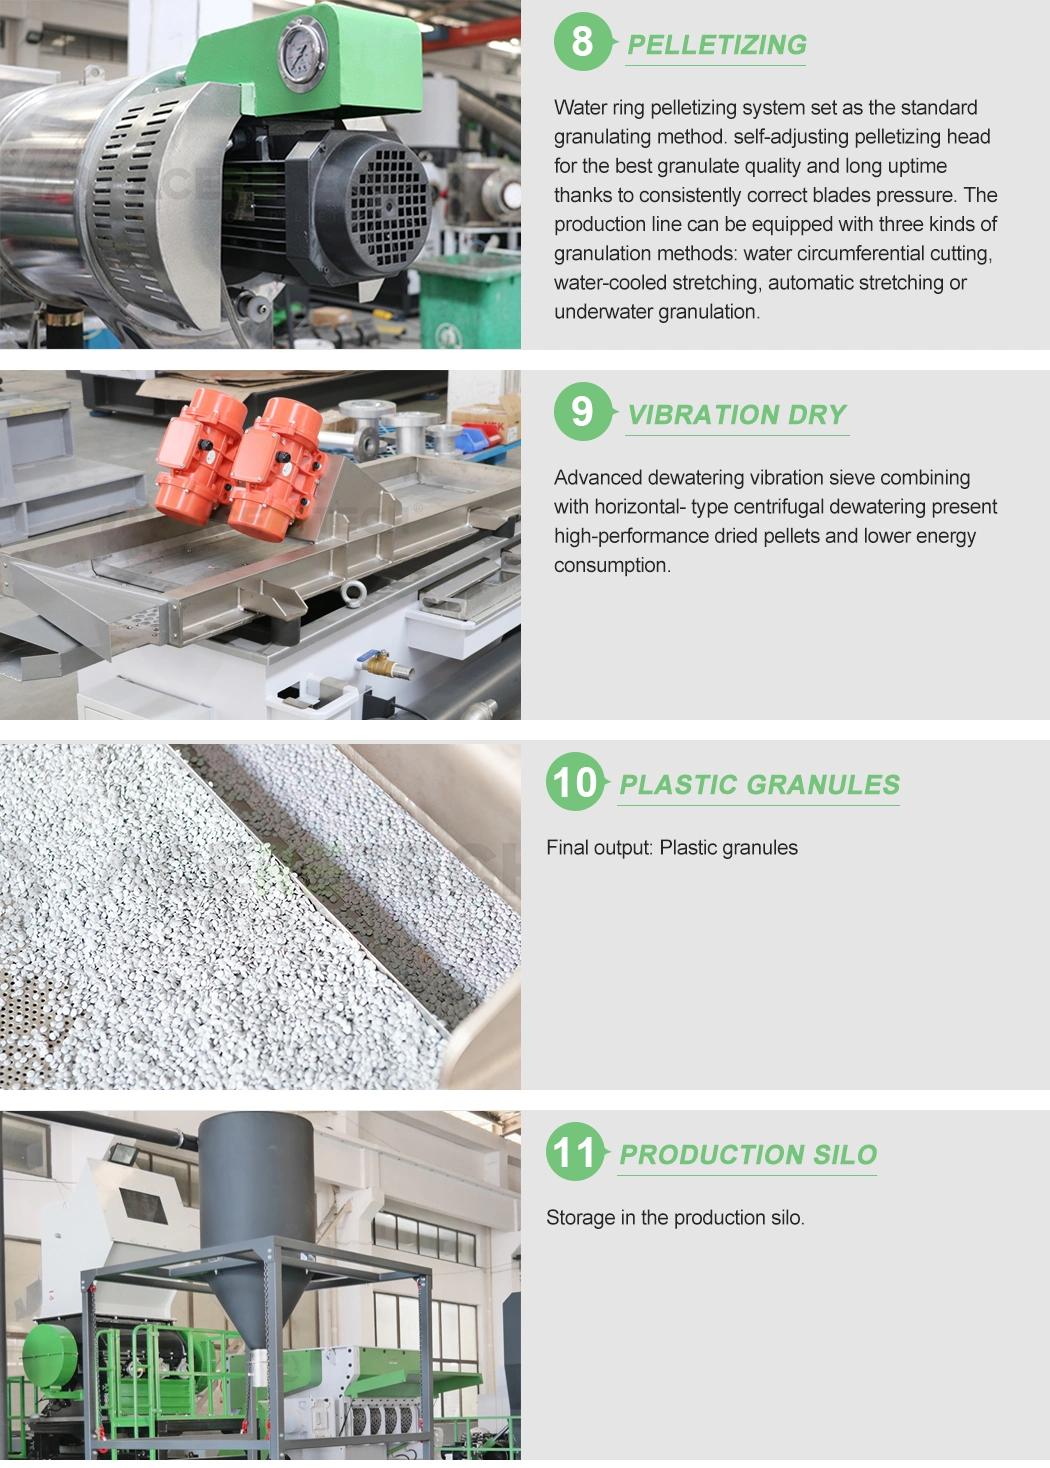 Famous Brand Motor PVC Plastic Bag Recycling Pelleting Granules Manufacturing Process Machine for Russian